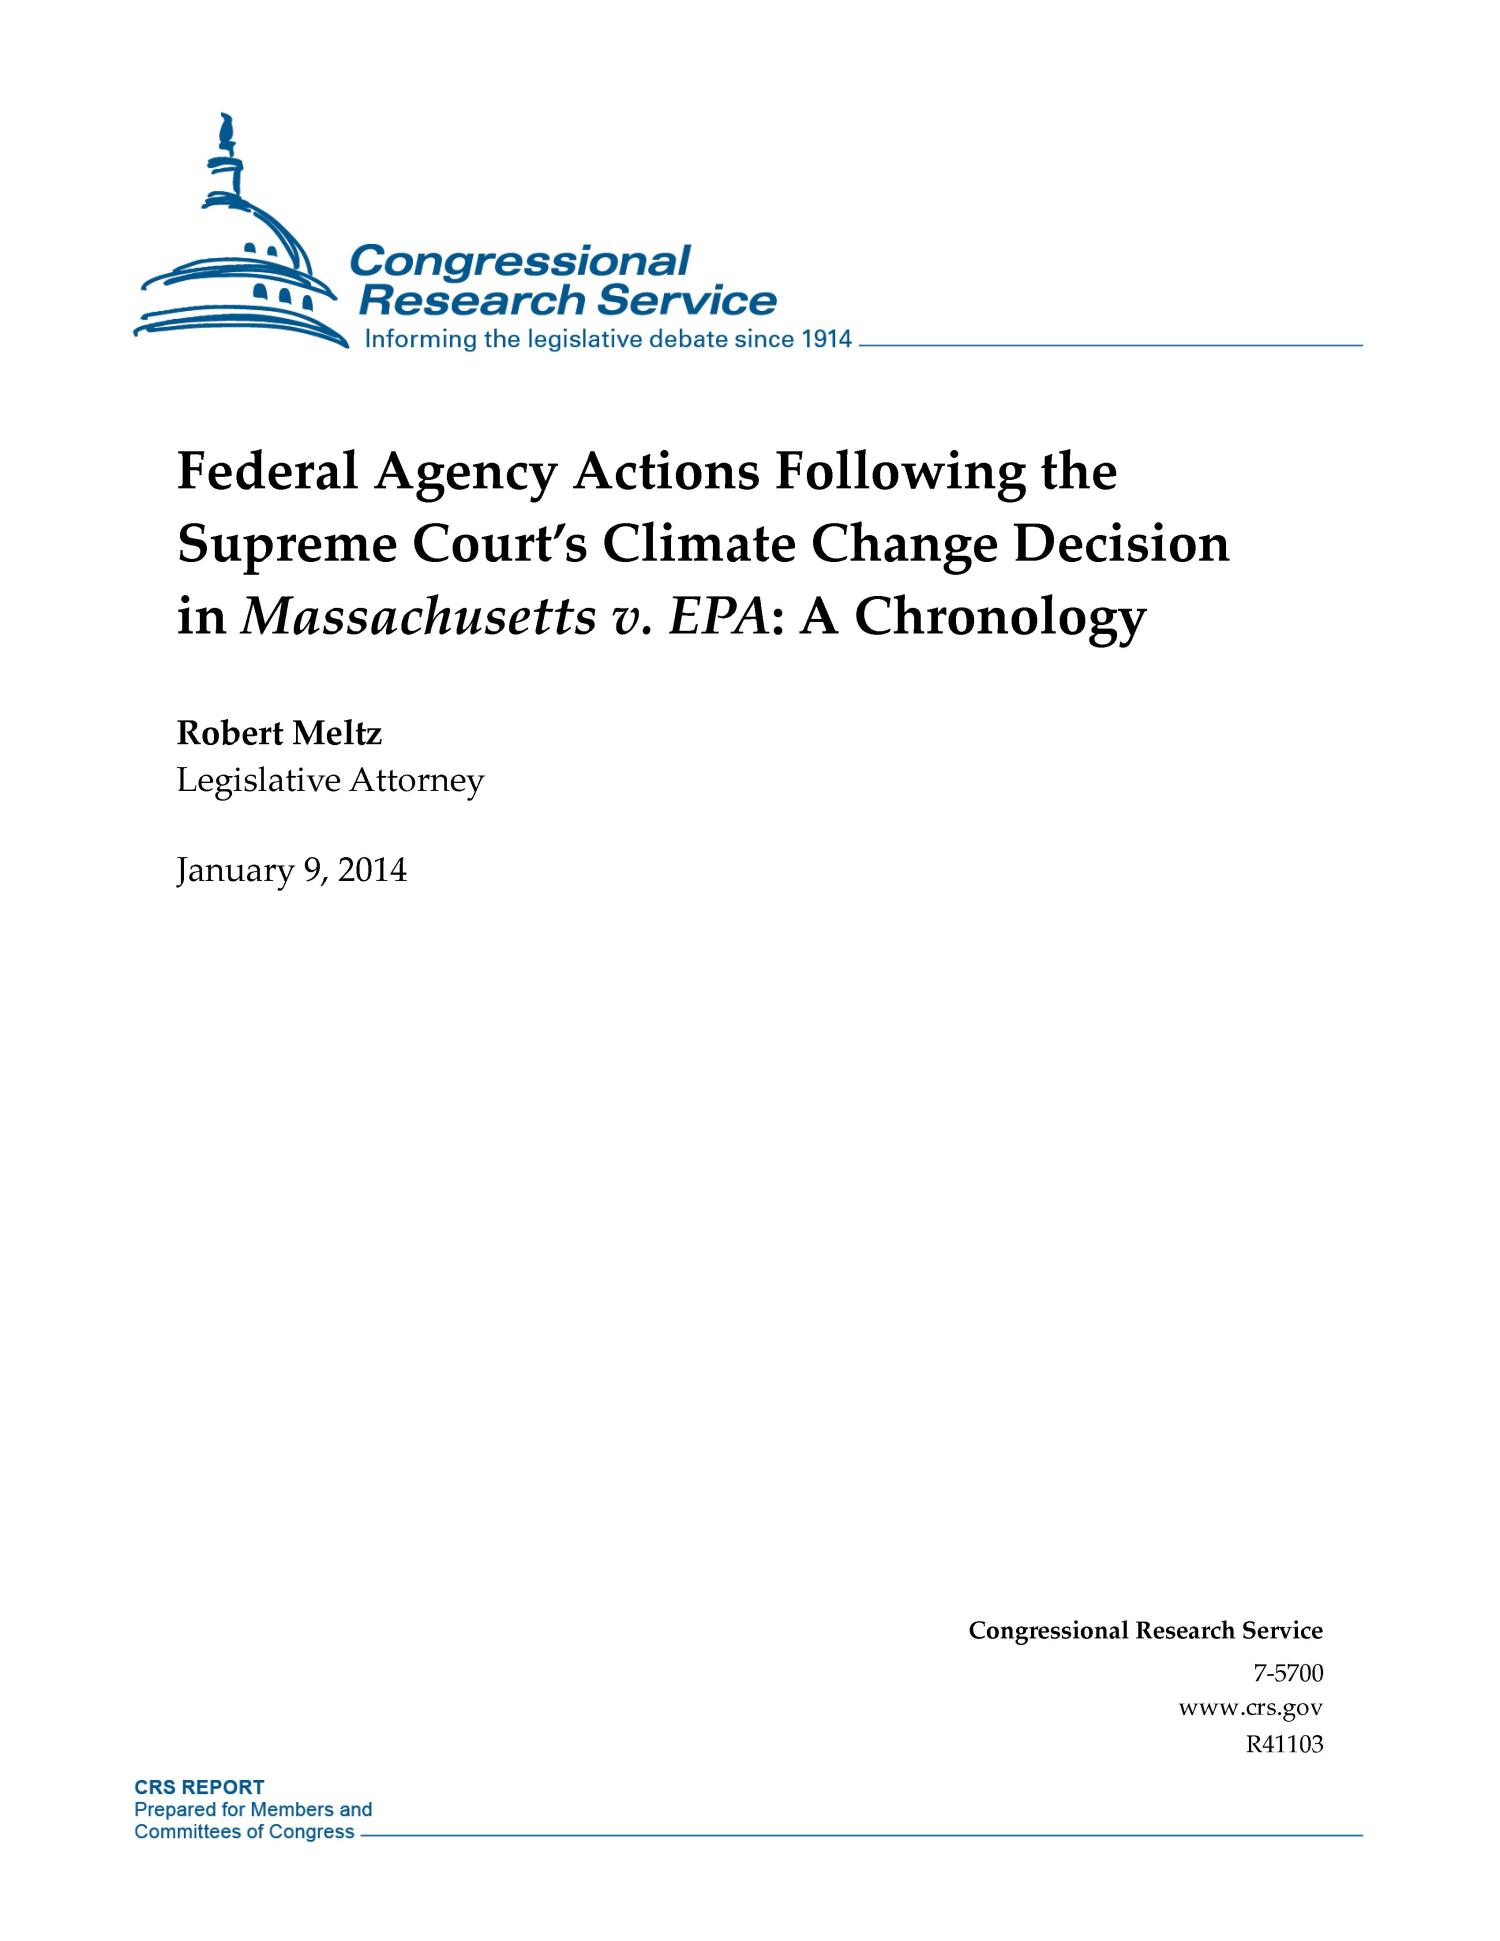 Federal Agency Actions Following the Supreme Court’s Climate Change Decision in Massachusetts v. EPA: A Chronology
                                                
                                                    [Sequence #]: 1 of 14
                                                